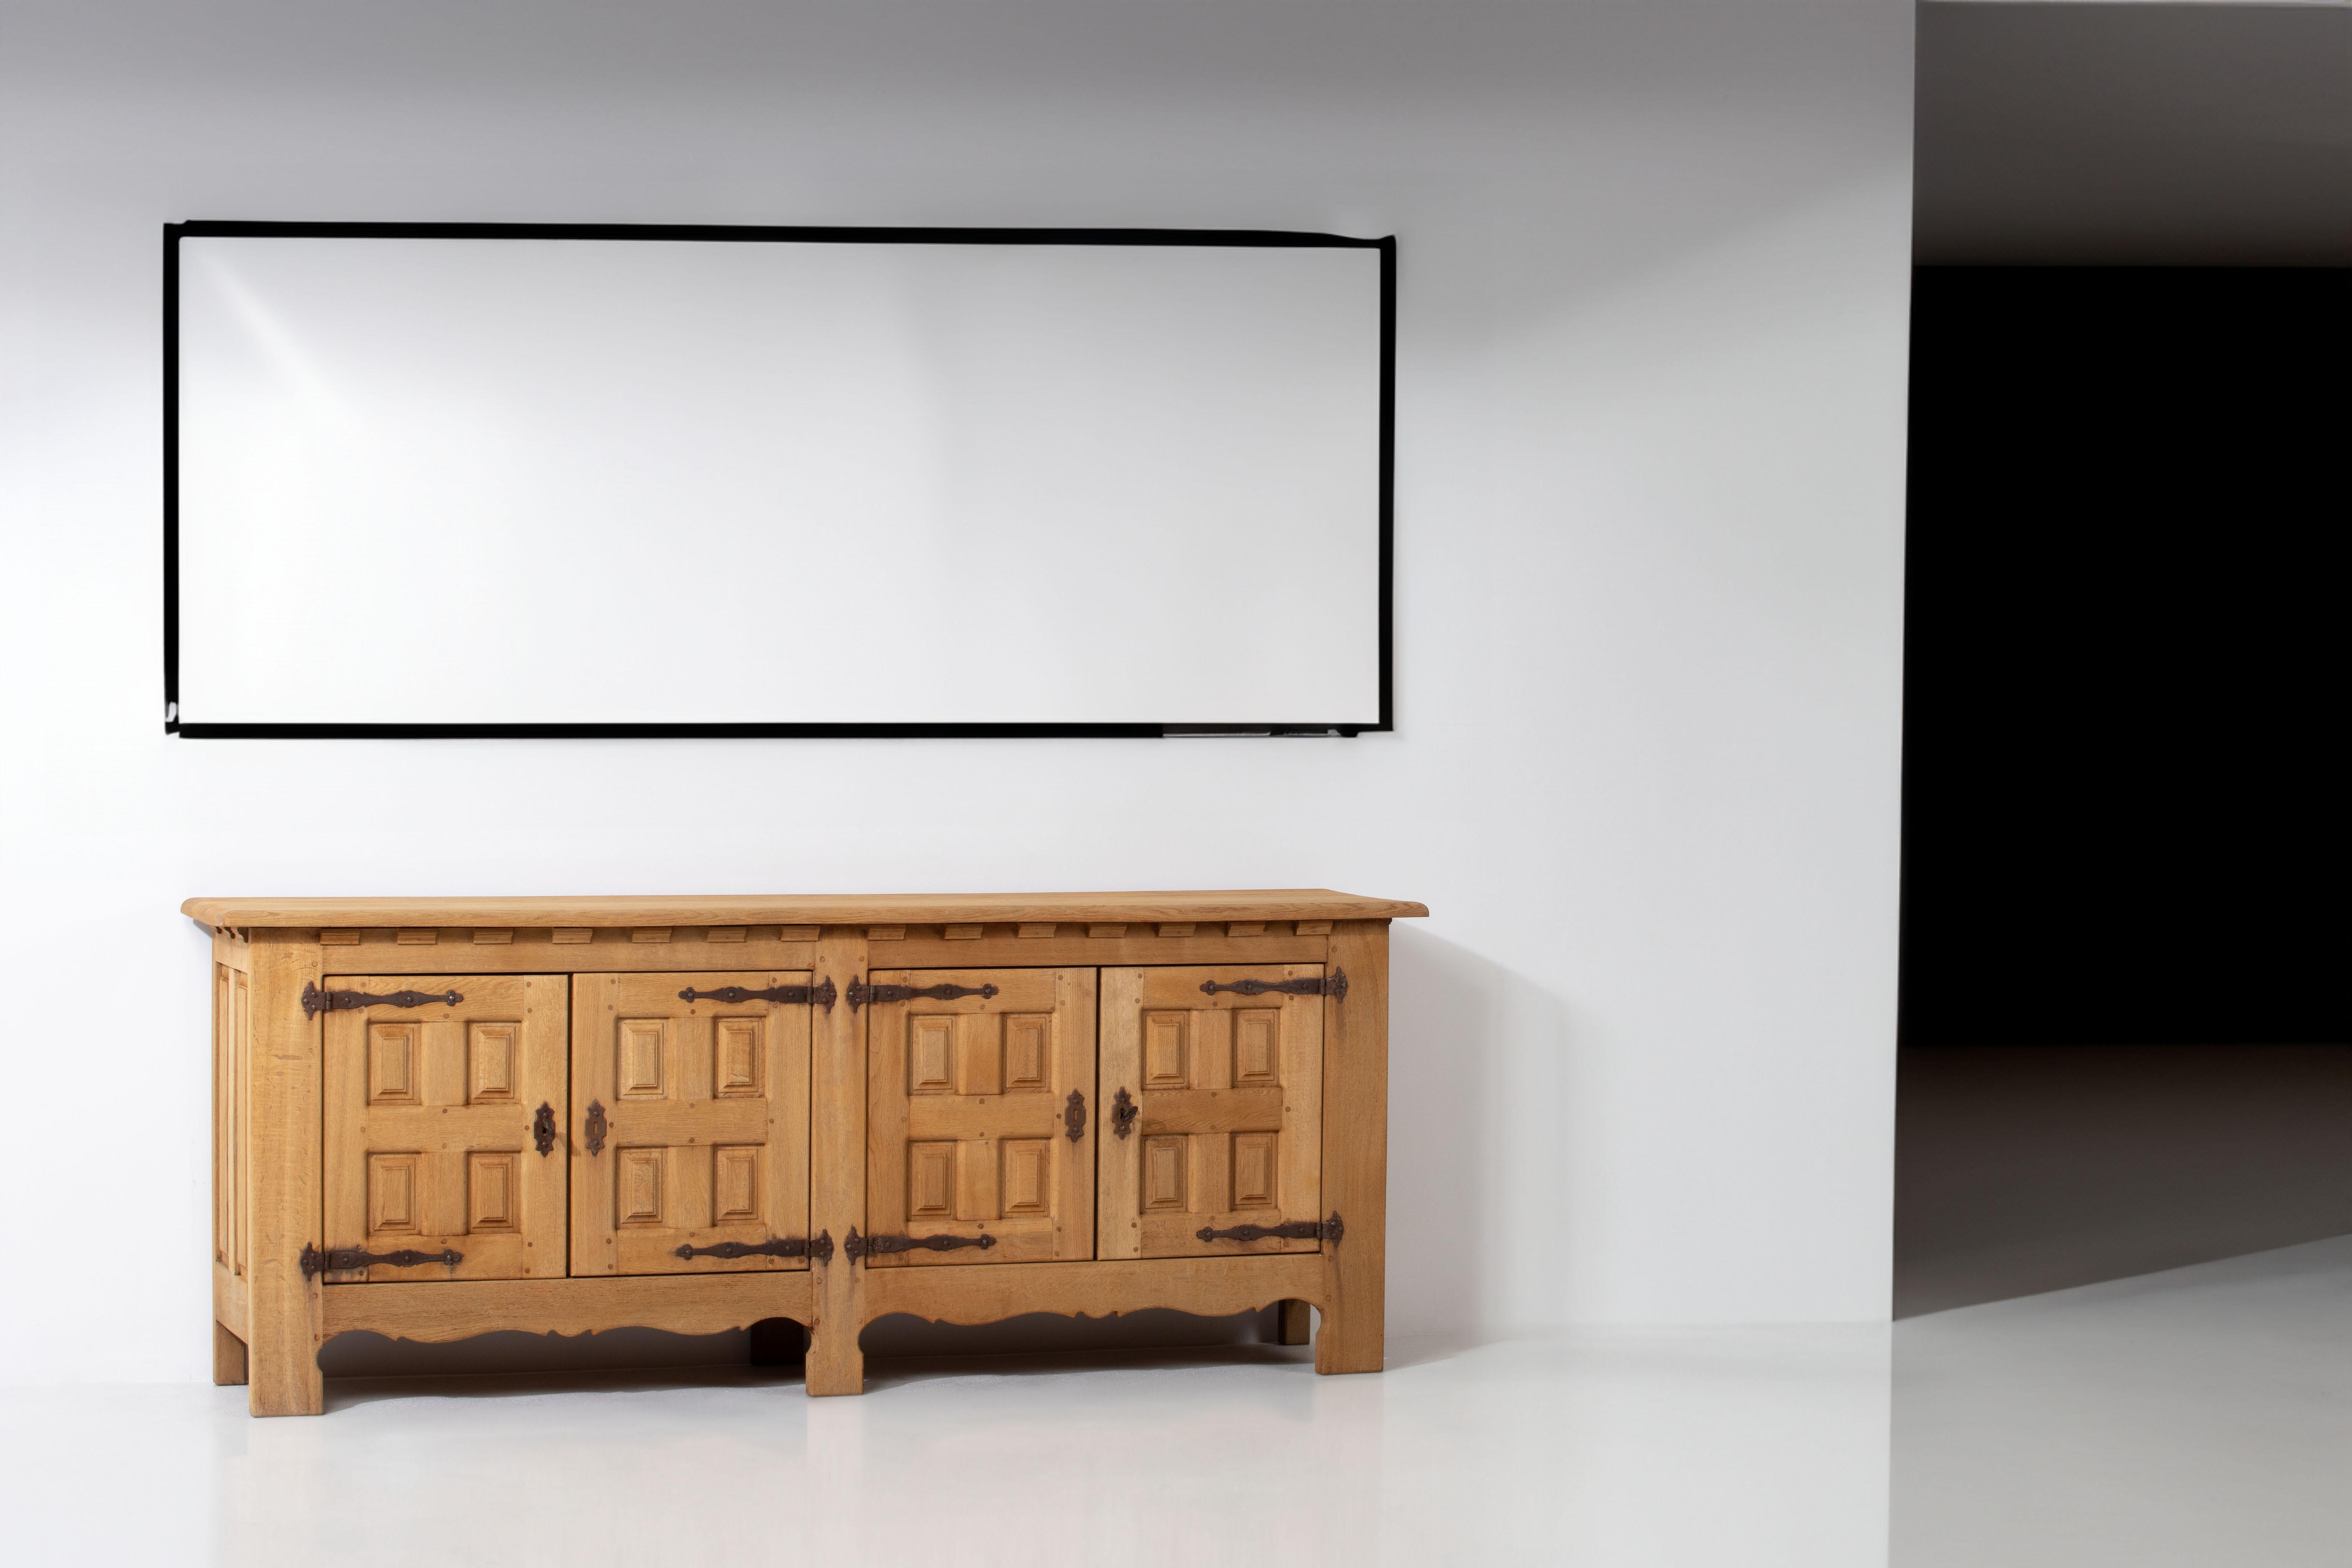 Step into the world of authentic French design with this exquisite cabinet, a delightful sideboard crafted from solid oak and inspired by the renowned French designer duo Guillerme et Chambron. Unearthed in a chic chalet nestled in the picturesque